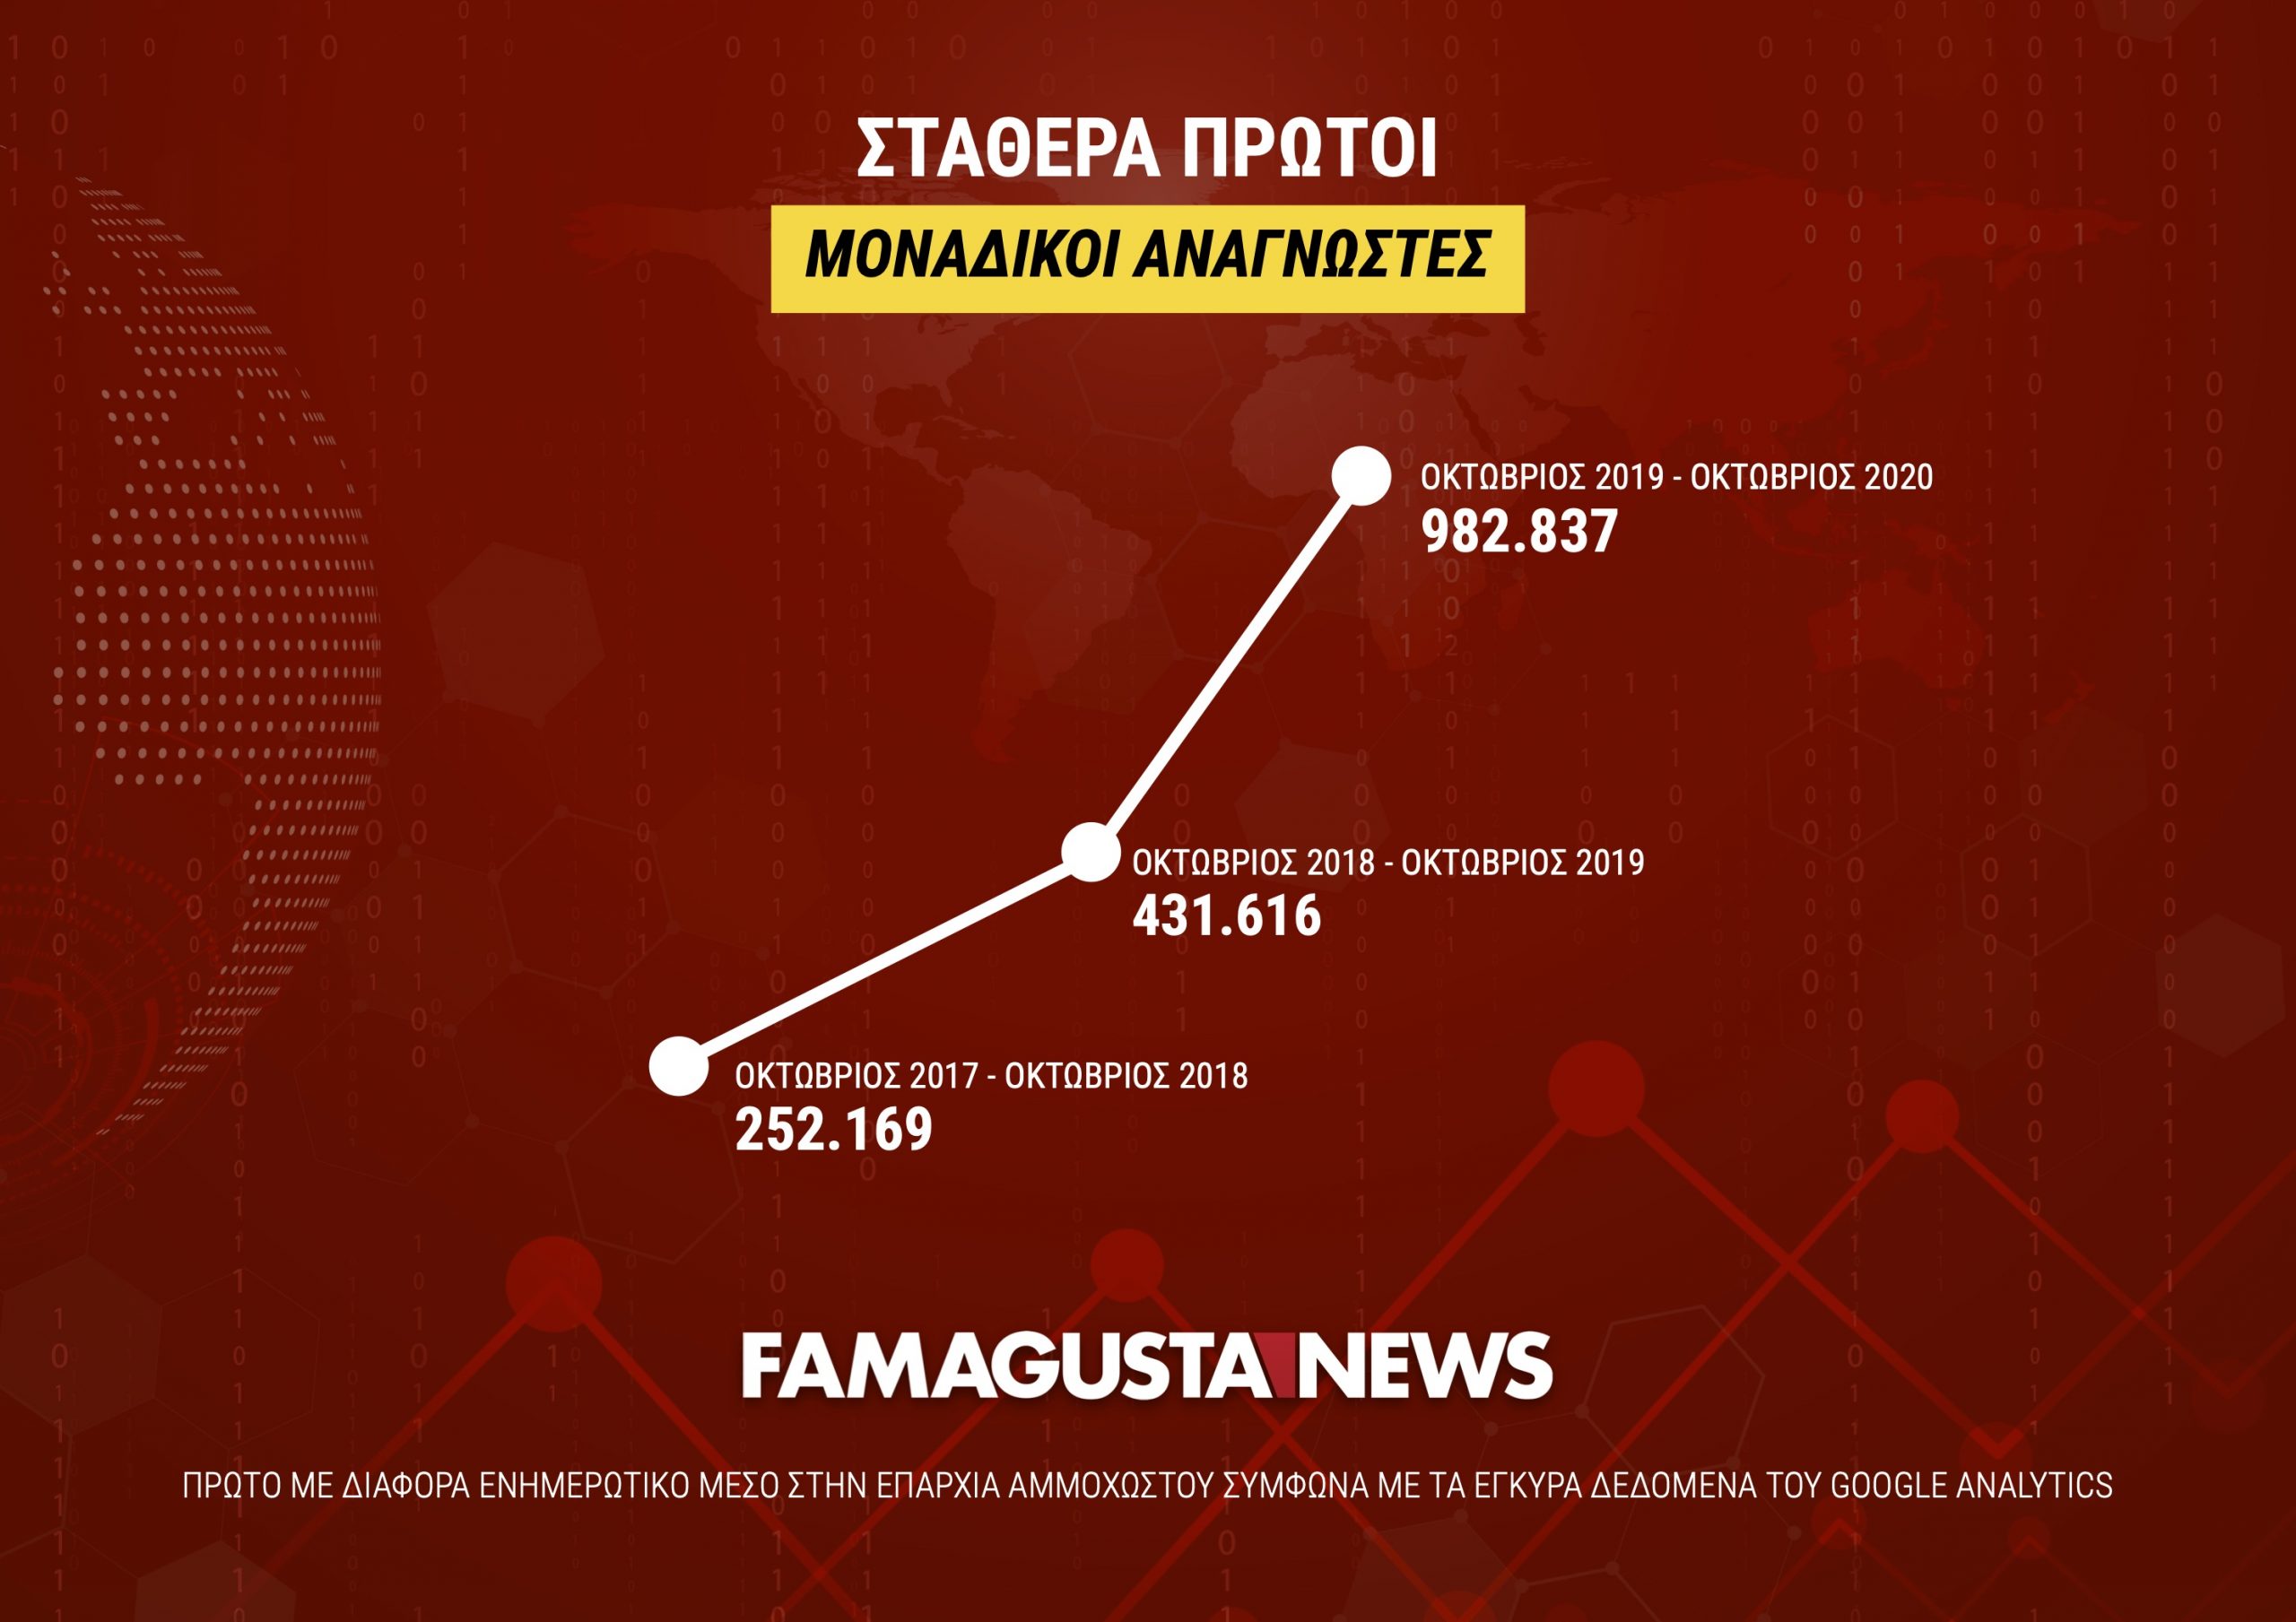 UNIQUE READERS scaled DarkWhite Media, exclusive, Famagusta.News, FamagustaNews